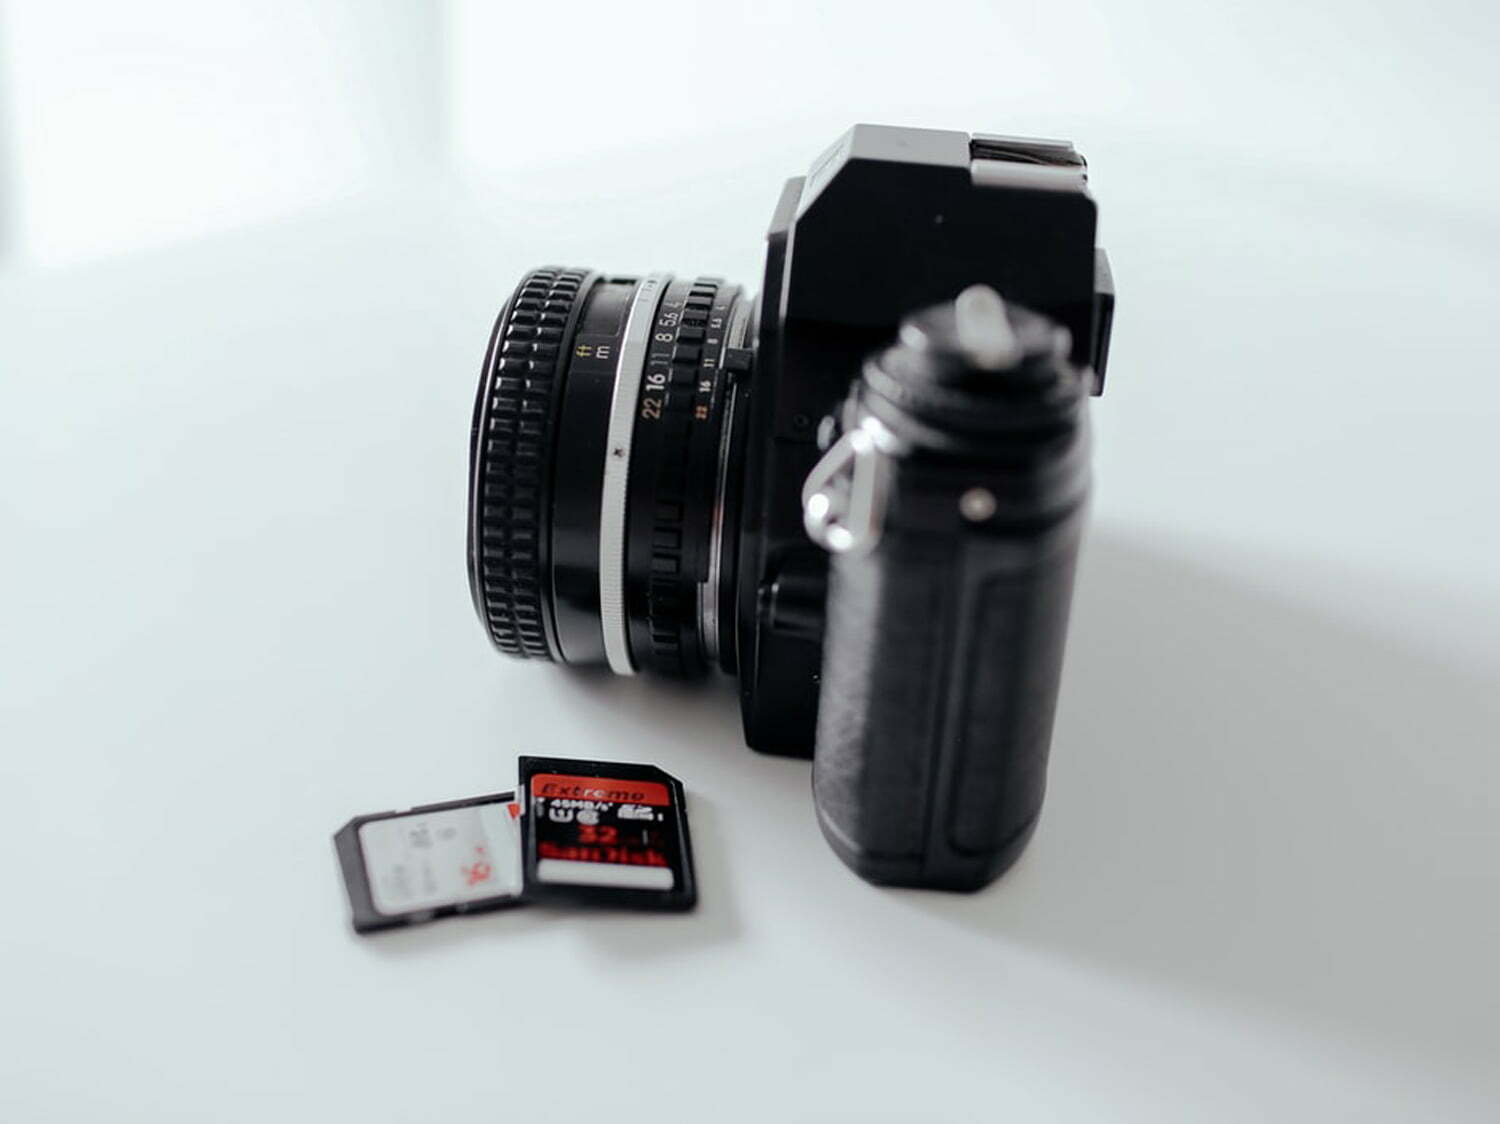 Camera Profile with SD Card on Table